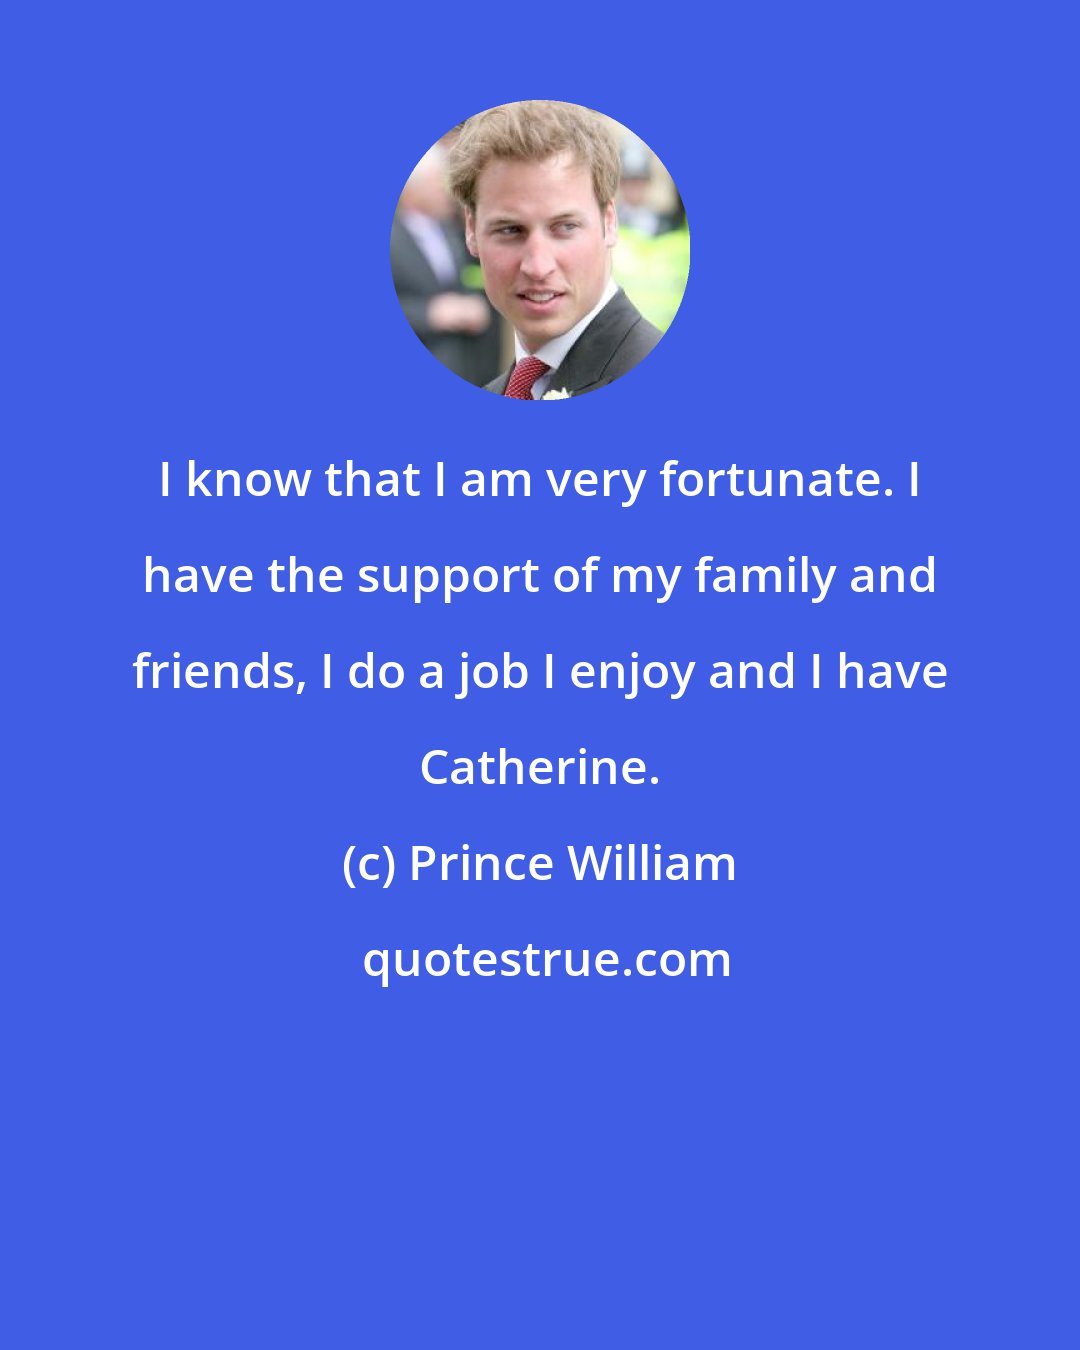 Prince William: I know that I am very fortunate. I have the support of my family and friends, I do a job I enjoy and I have Catherine.